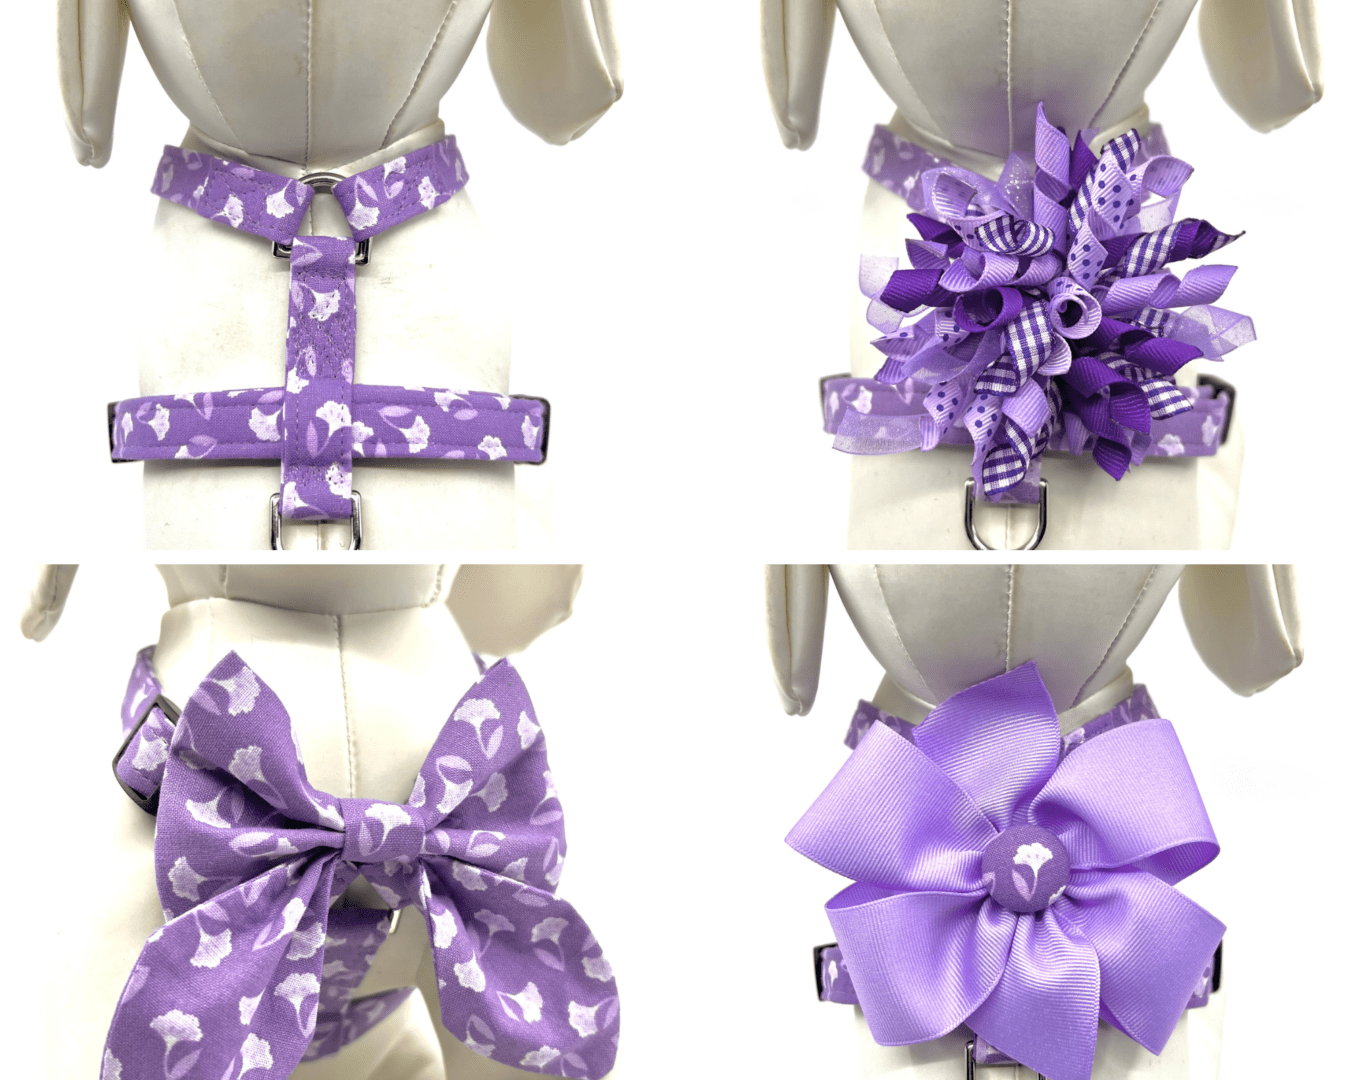 Four pictures of a purple dog harness with a bow on it.